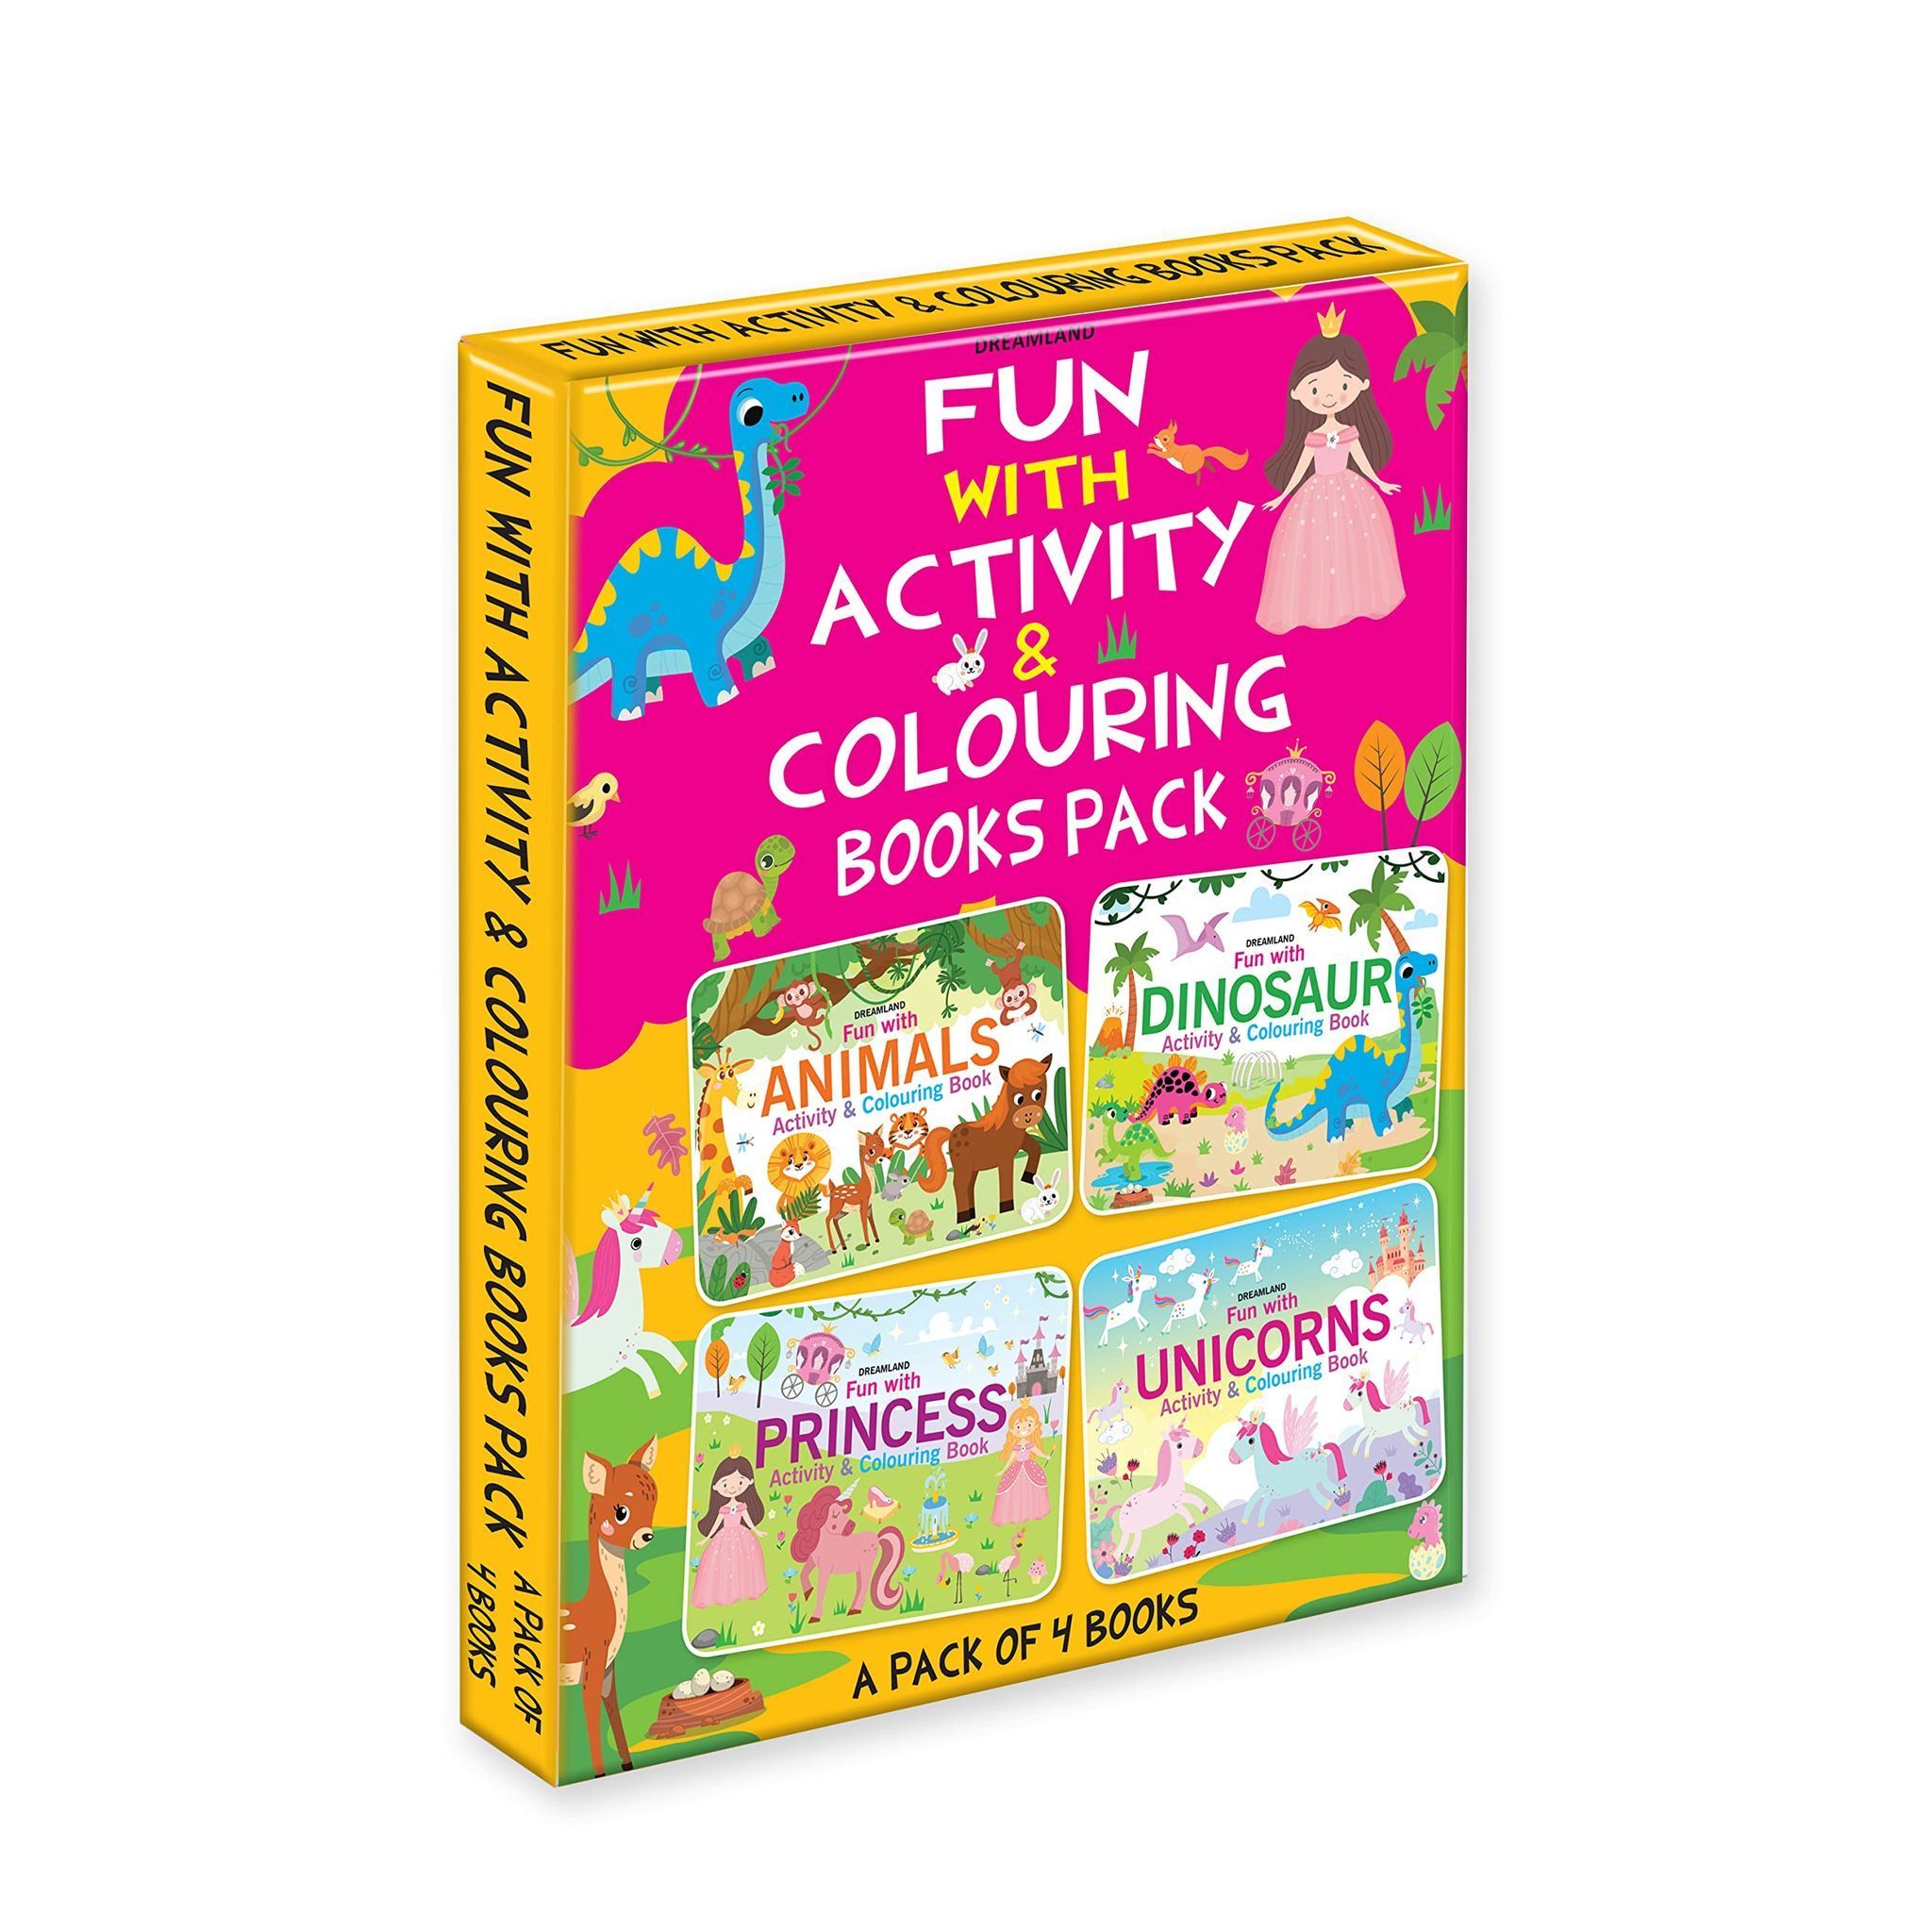 Fun with Activity & Colouring Books Pack- A Pack of 4 Books [Paperback] Dreamland Publications